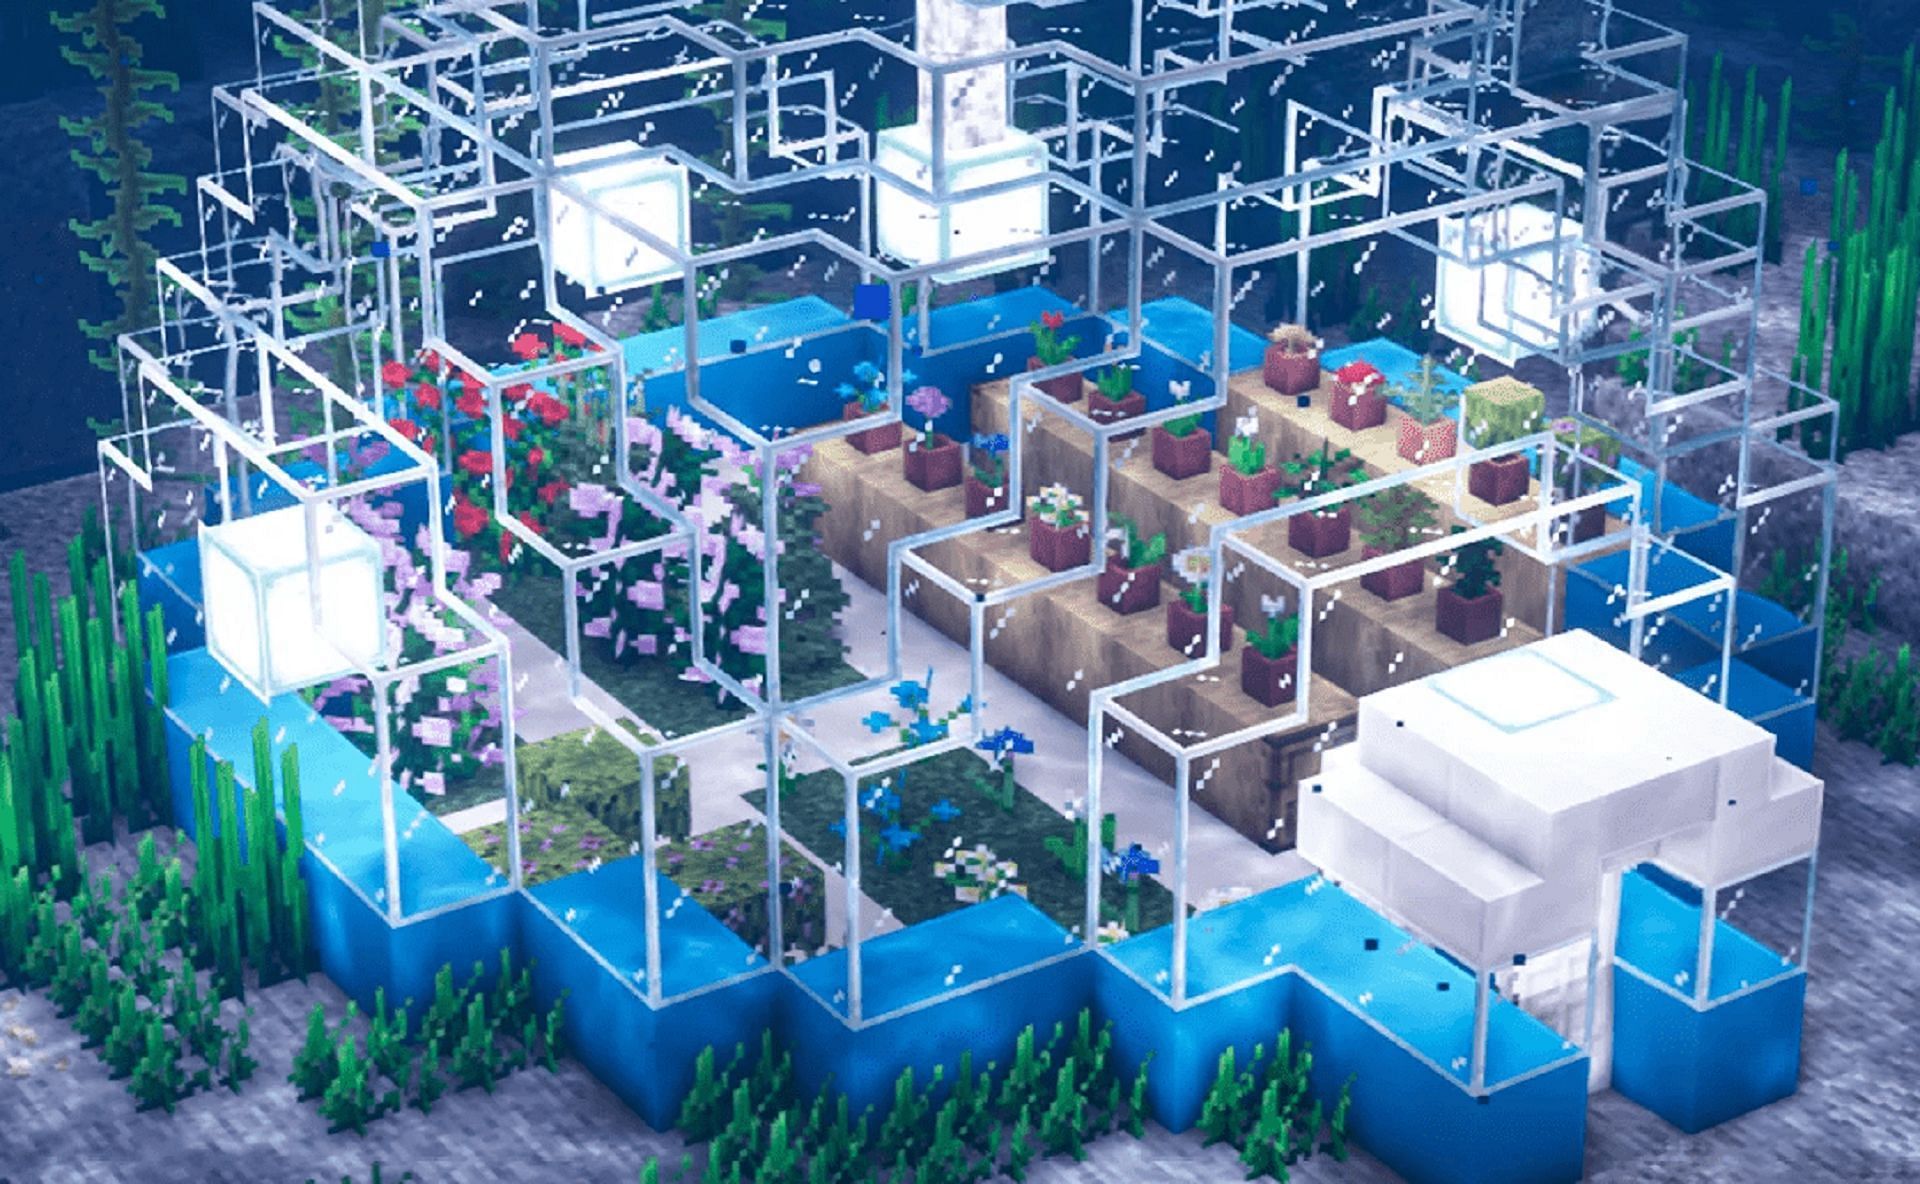 Keep your plantlife safe and secure in this underwater greenhouse (Image via Disruptive_builds/YouTube)